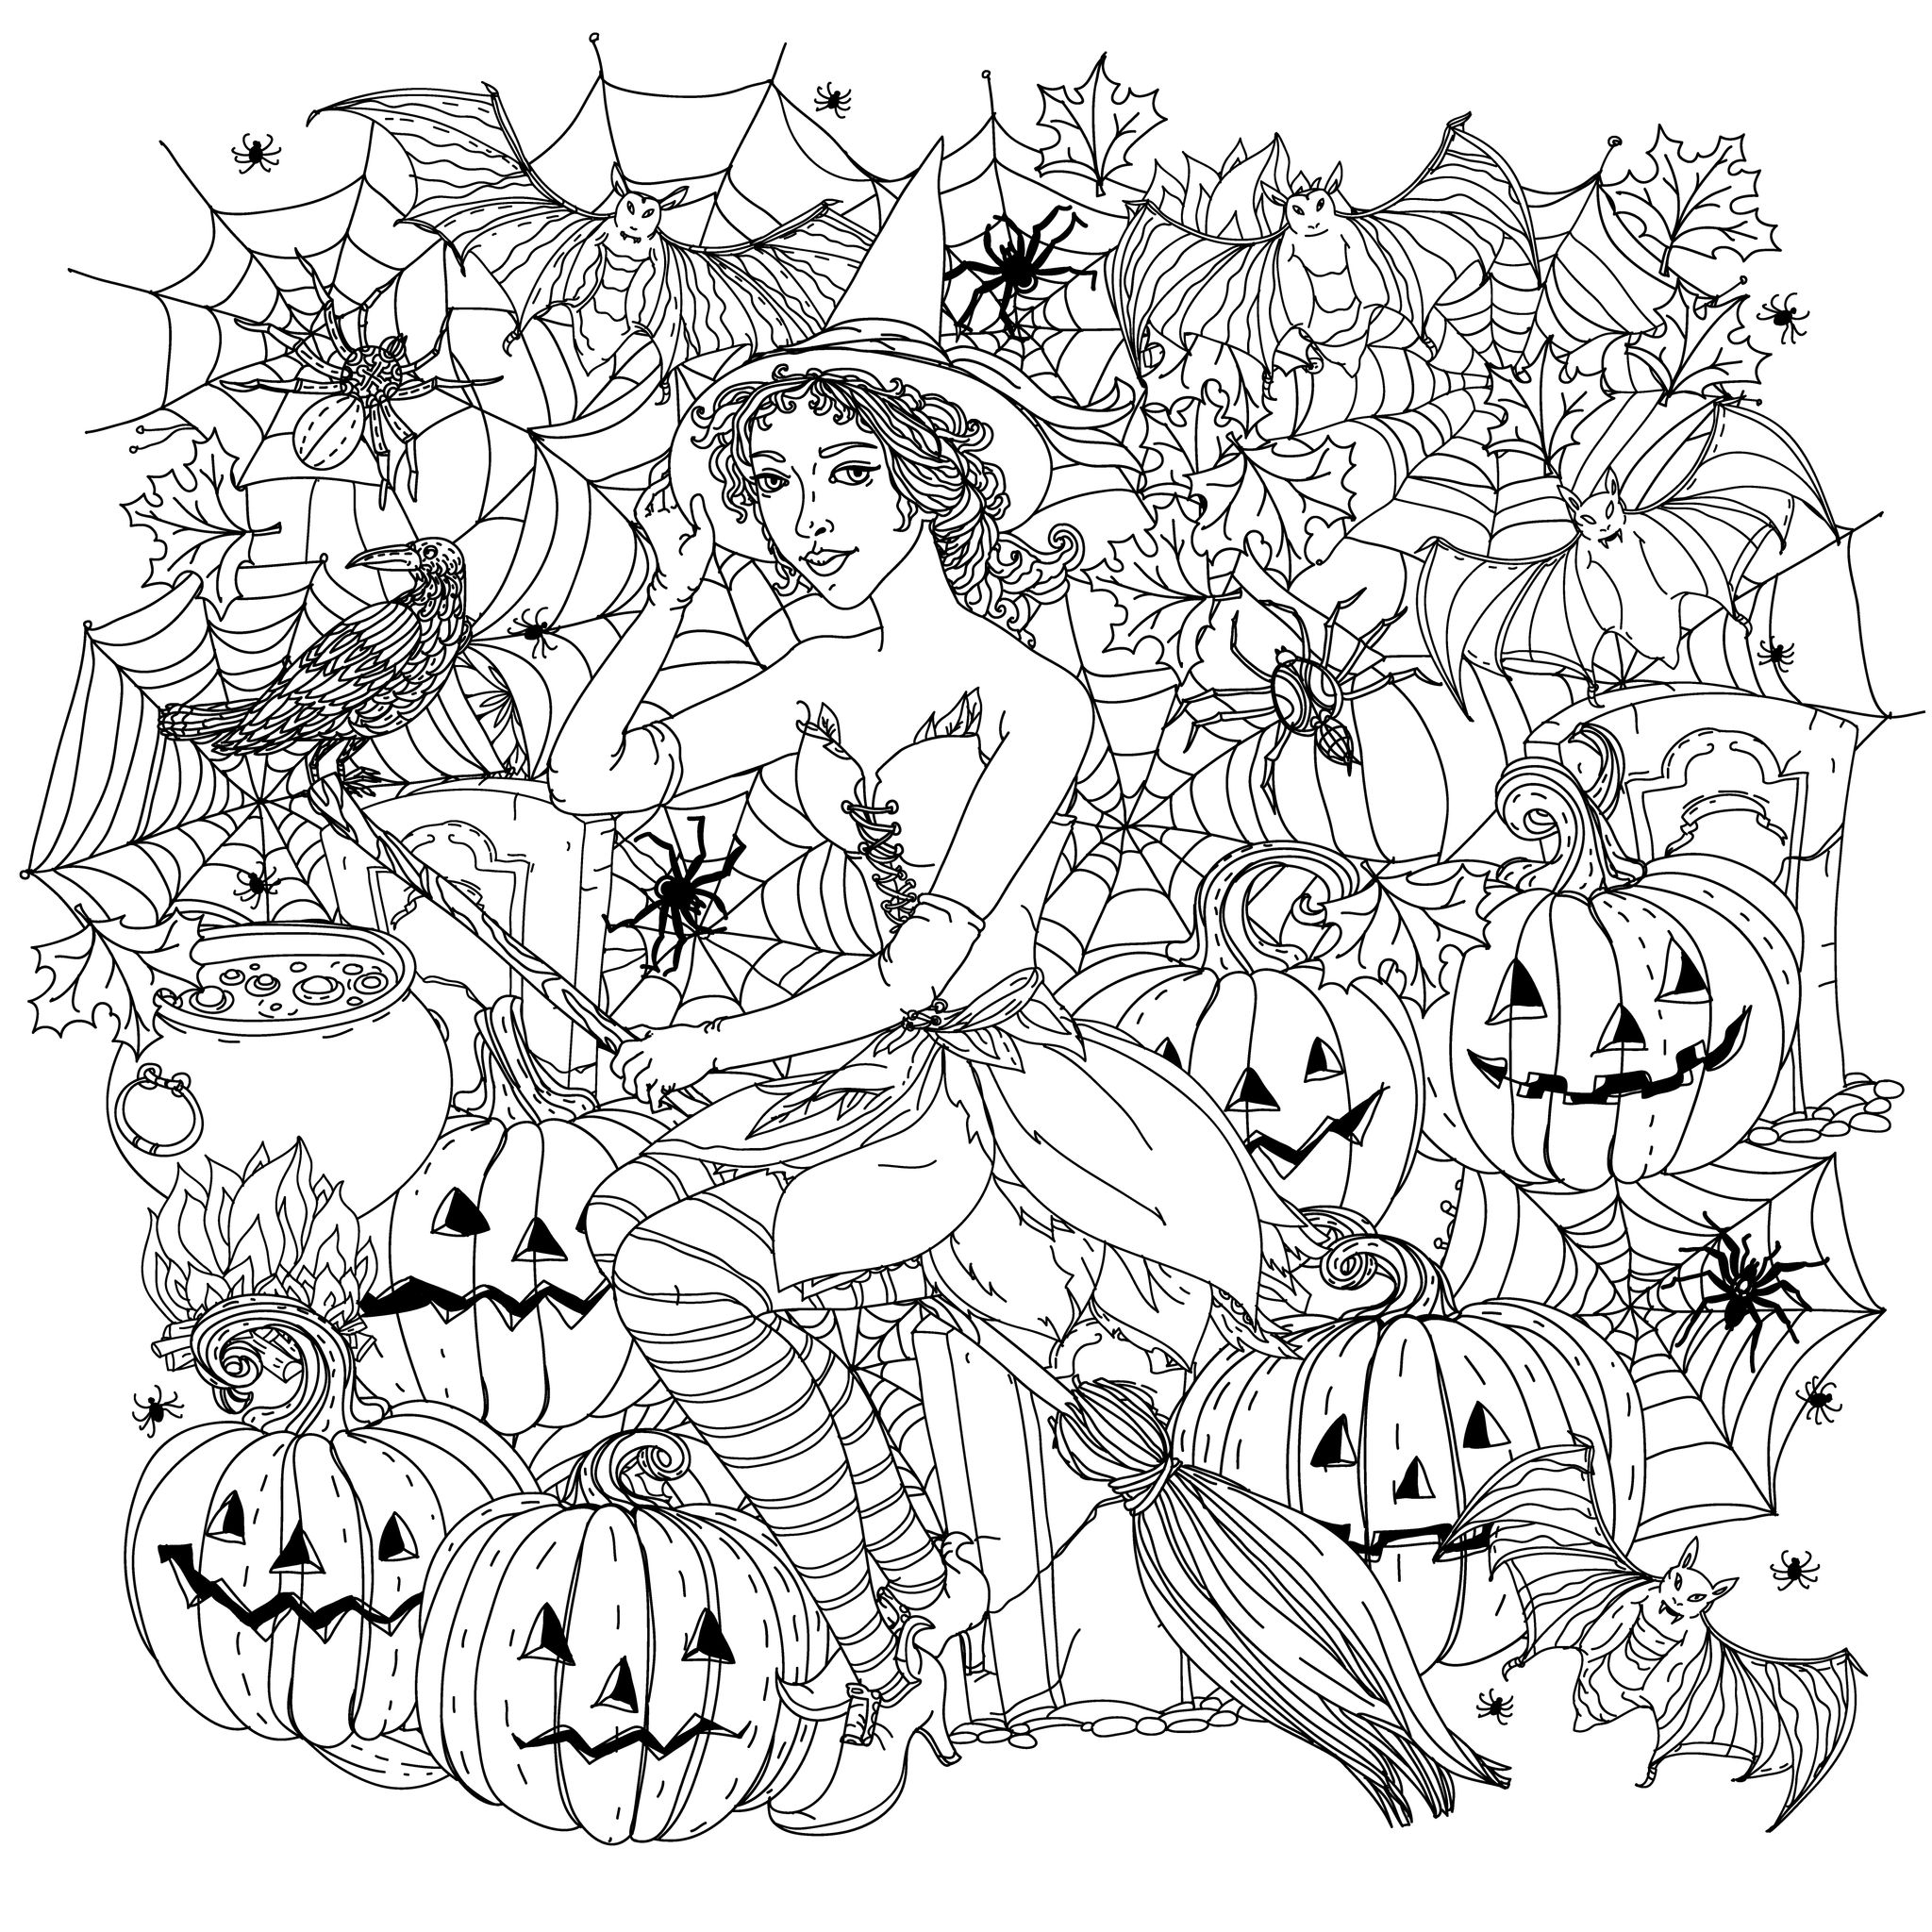 Download Halloween witch with pumpkins - Halloween Adult Coloring Pages